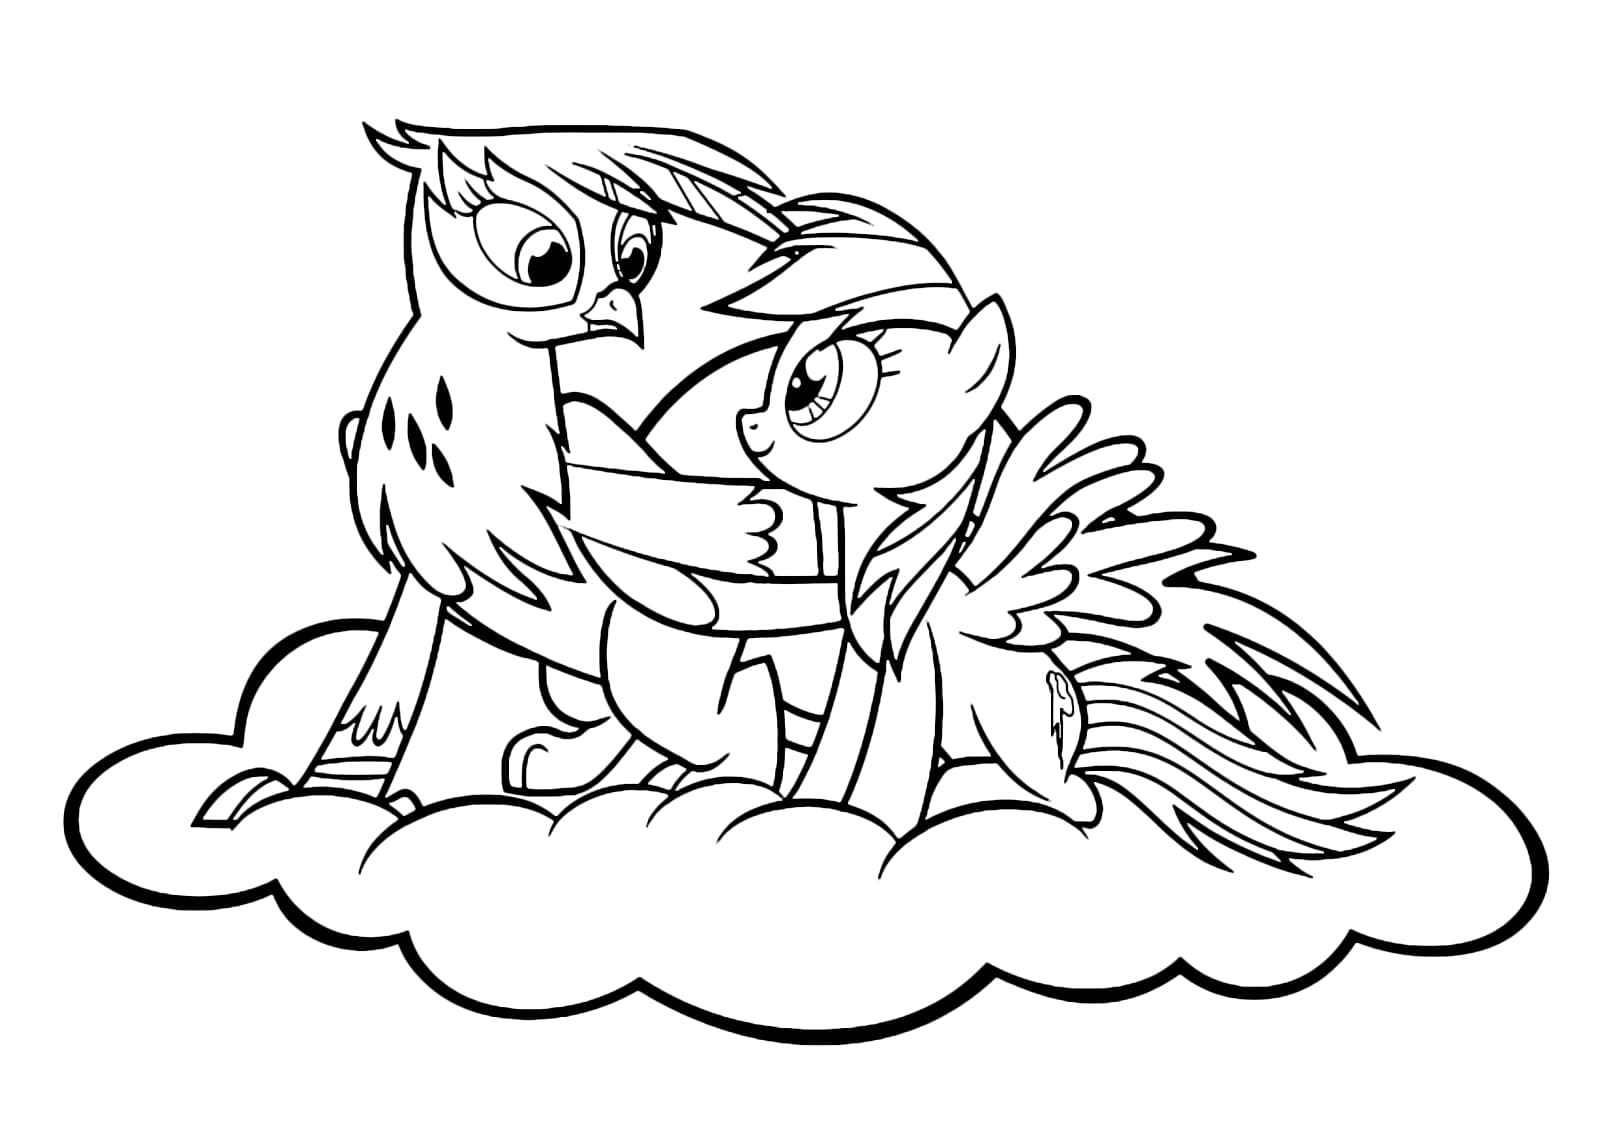 The Griffon Gilda on a cloud Coloring Page